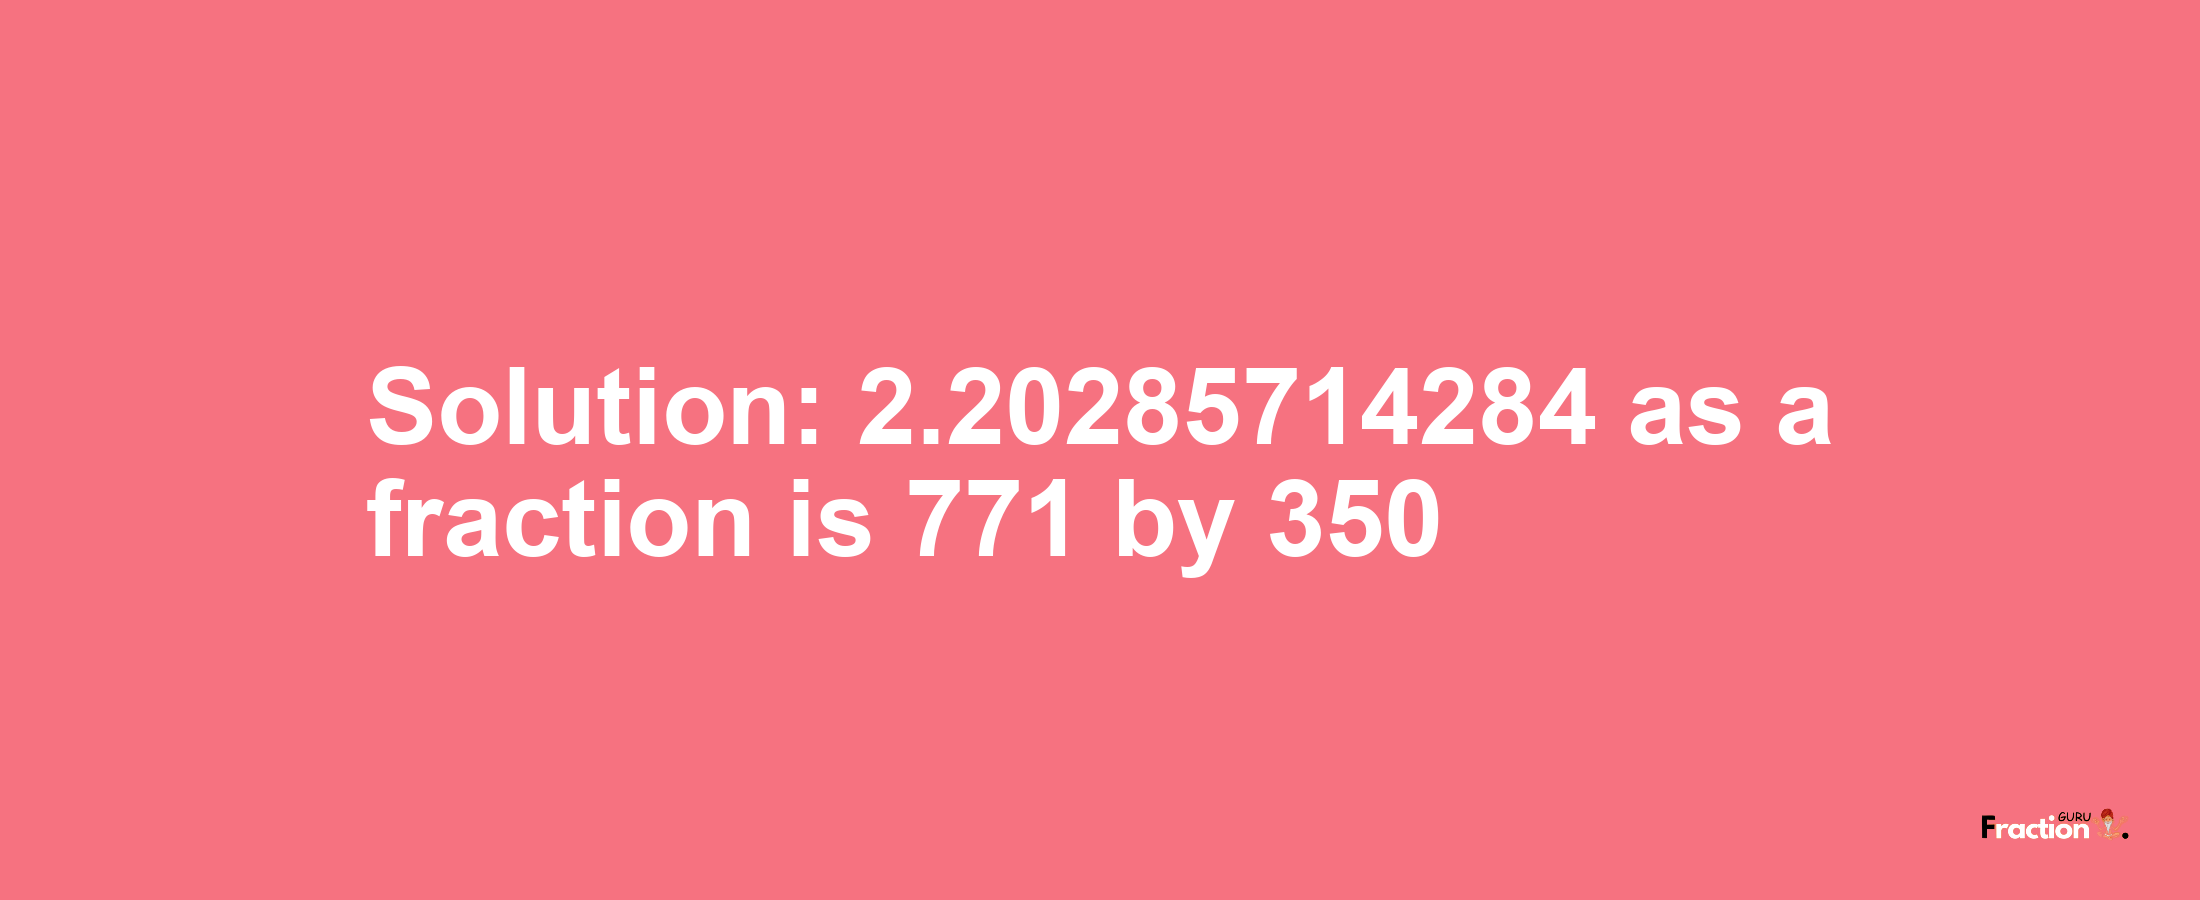 Solution:2.20285714284 as a fraction is 771/350